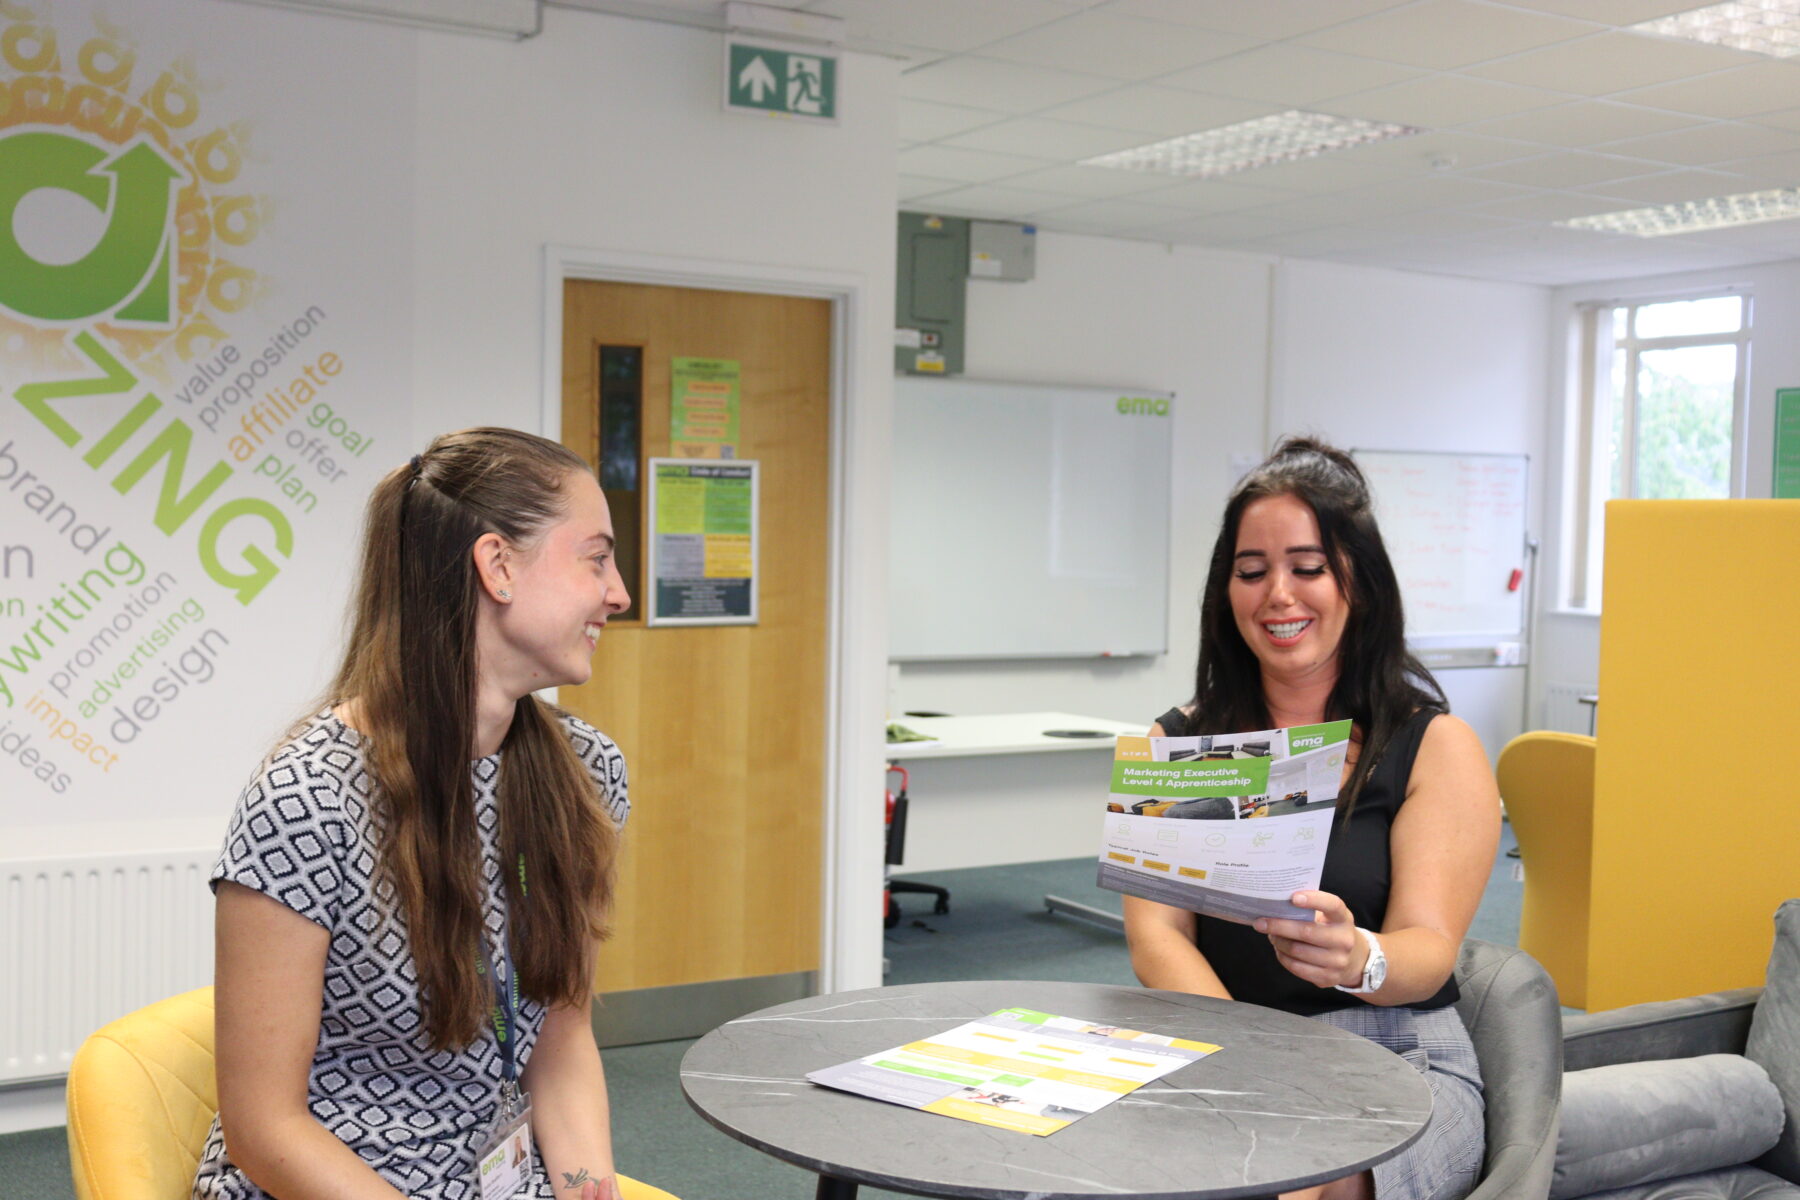 Holly, Digital Trainer and Louisa, Digital Programme Lead, looking over the digital course brochures.